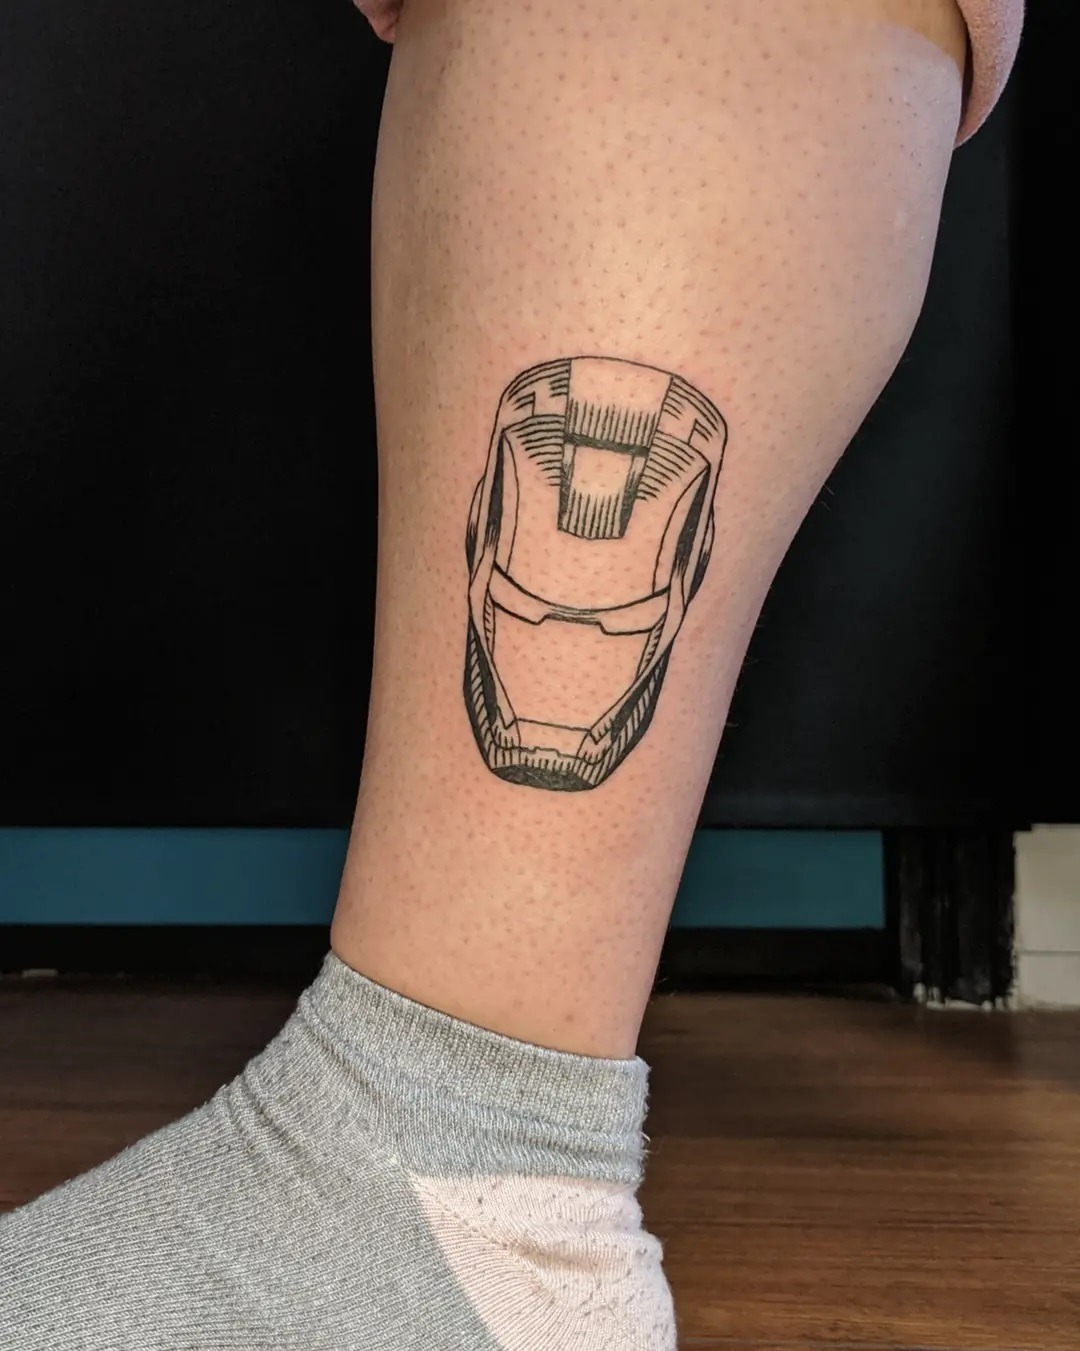 Black and Grey style Iron Man tattoo located on the